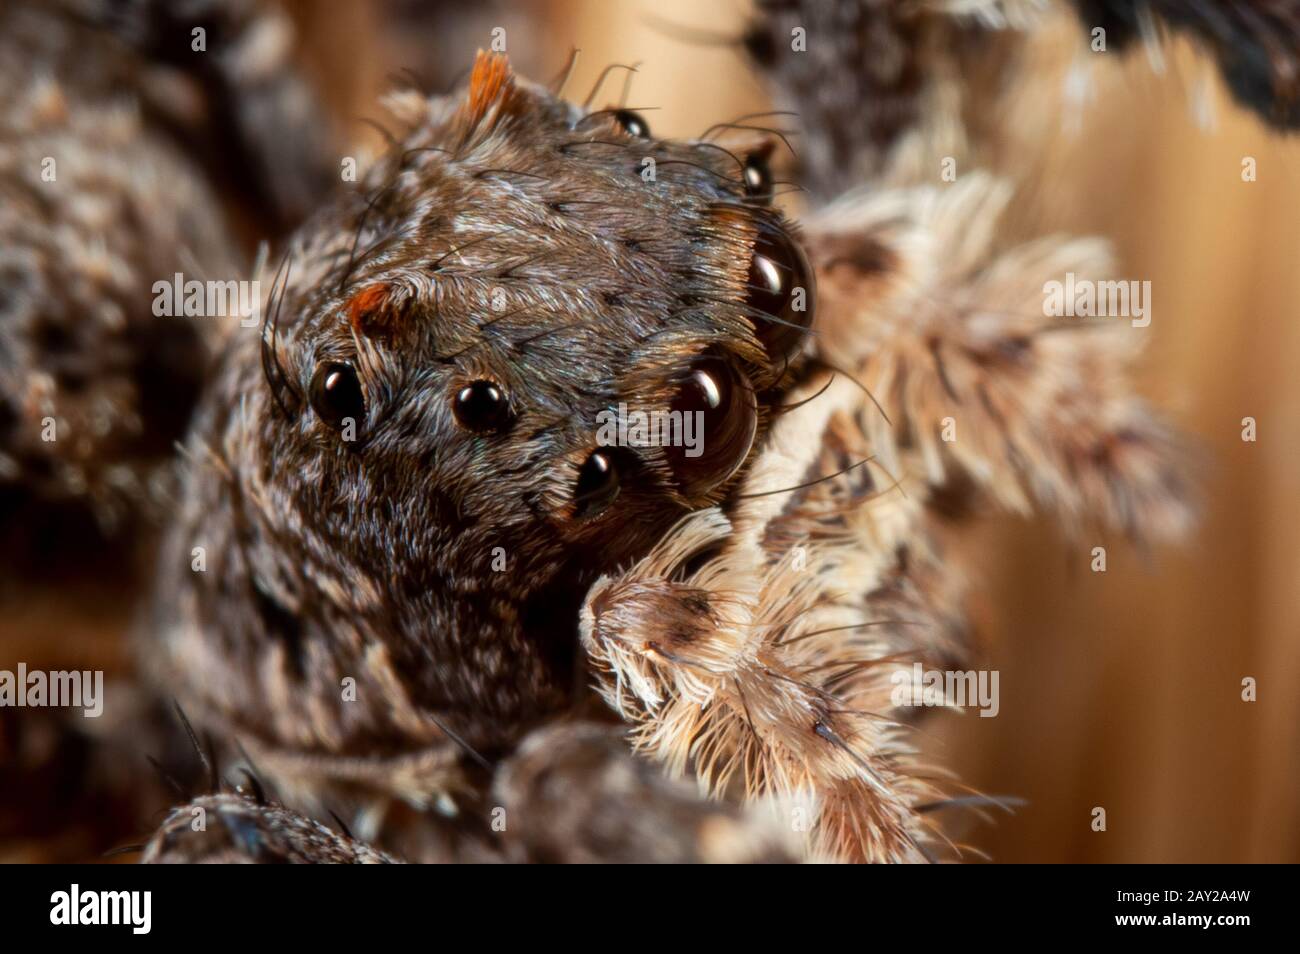 Macro Photography of Head of Portia Jumping Spider on a Broom Stock Photo -  Alamy